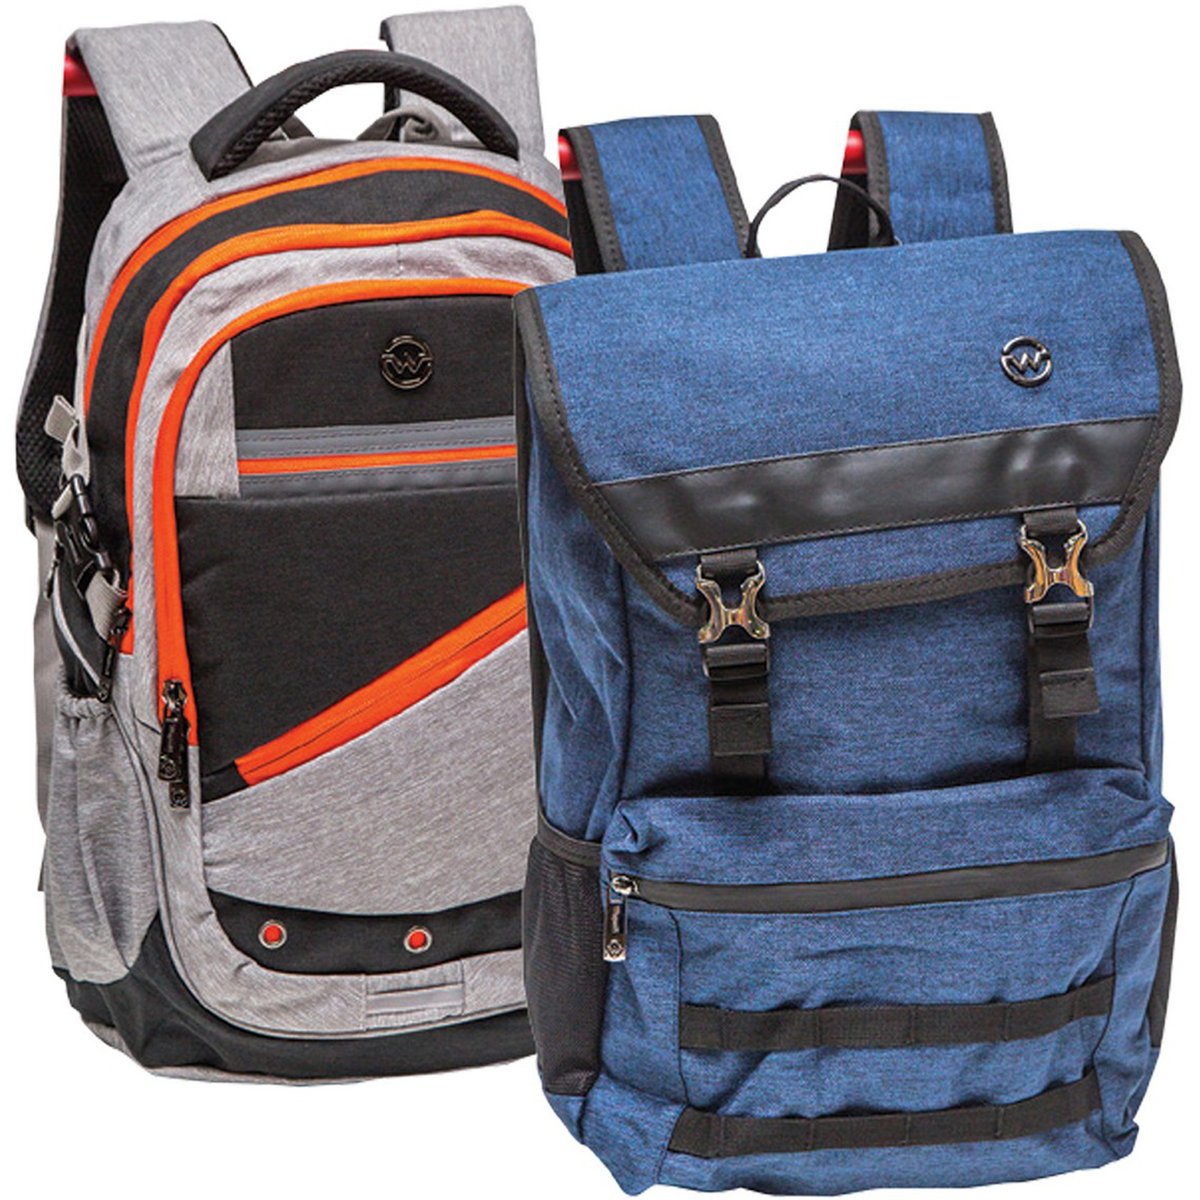 Wagon-R Topload Backpack KB17518 Assorted Per pc